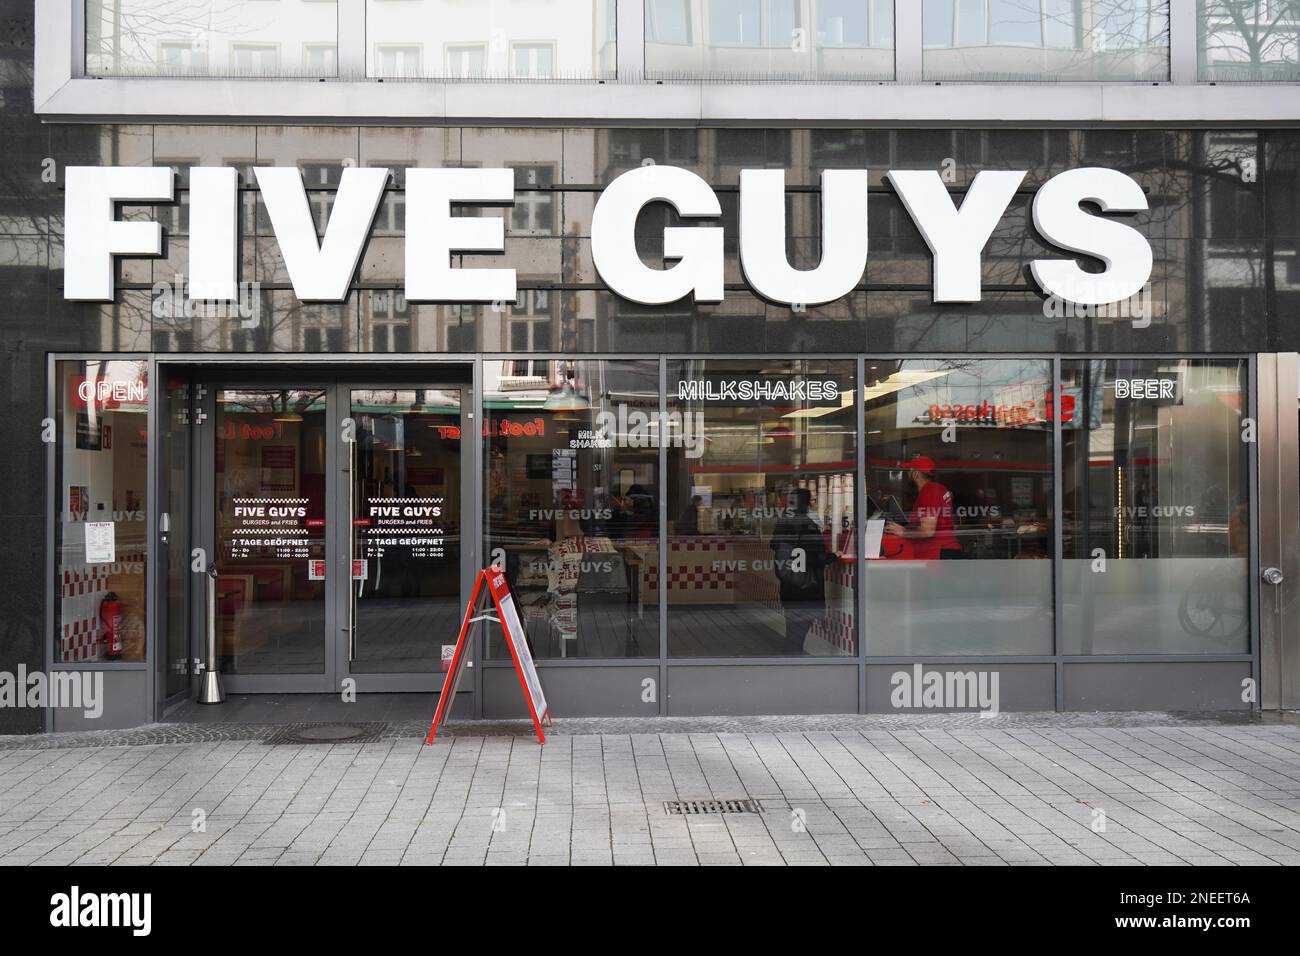 Hannover, Germany - March 2, 2020: Five Guys fast casual burger restaurant chain recently opened a local branch Stock Photo